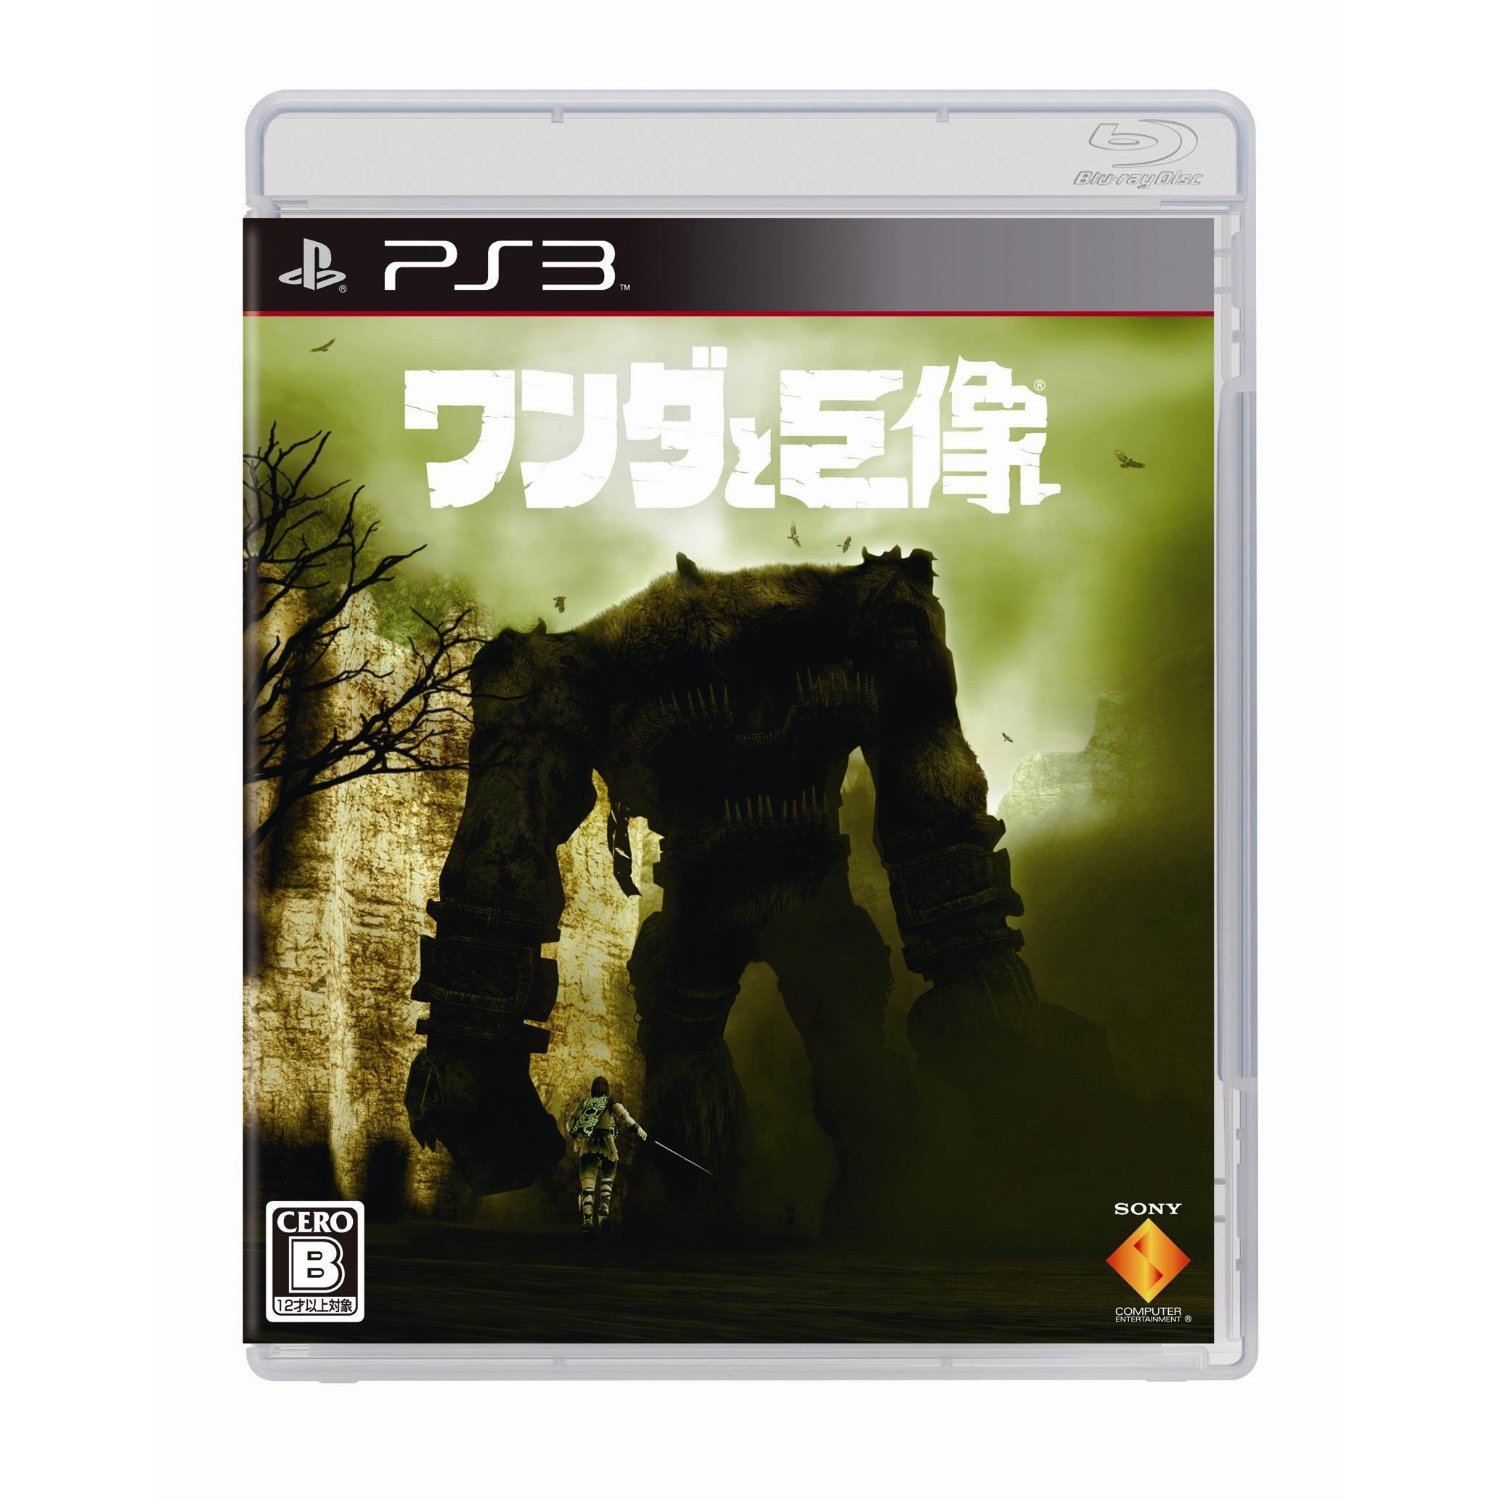 Wanda to Kyozou / Shadow of the Colossus [Limited Edition] for